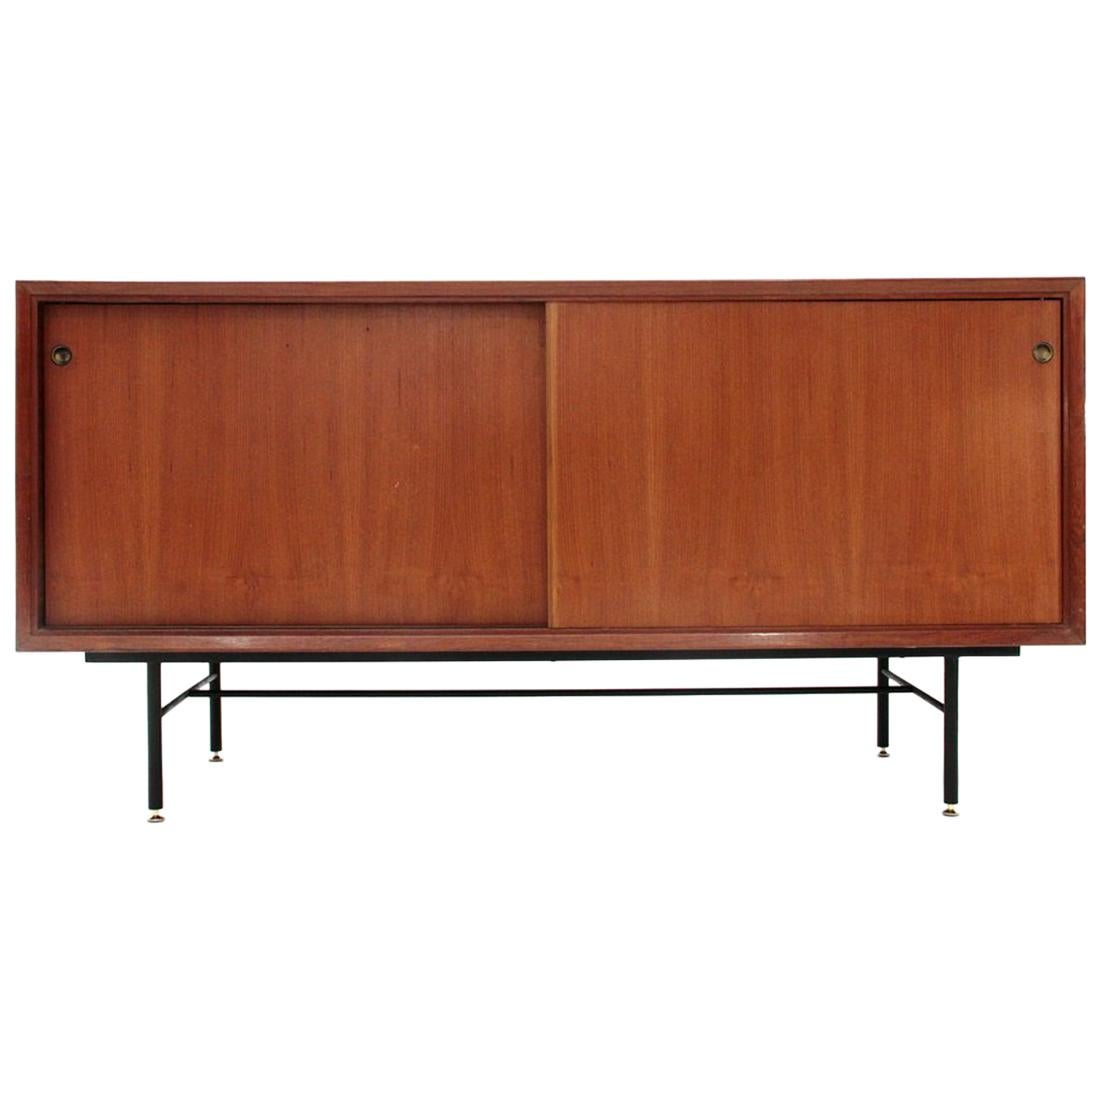 Italian Midcentury Sideboard with Black Glass Top, 1960s